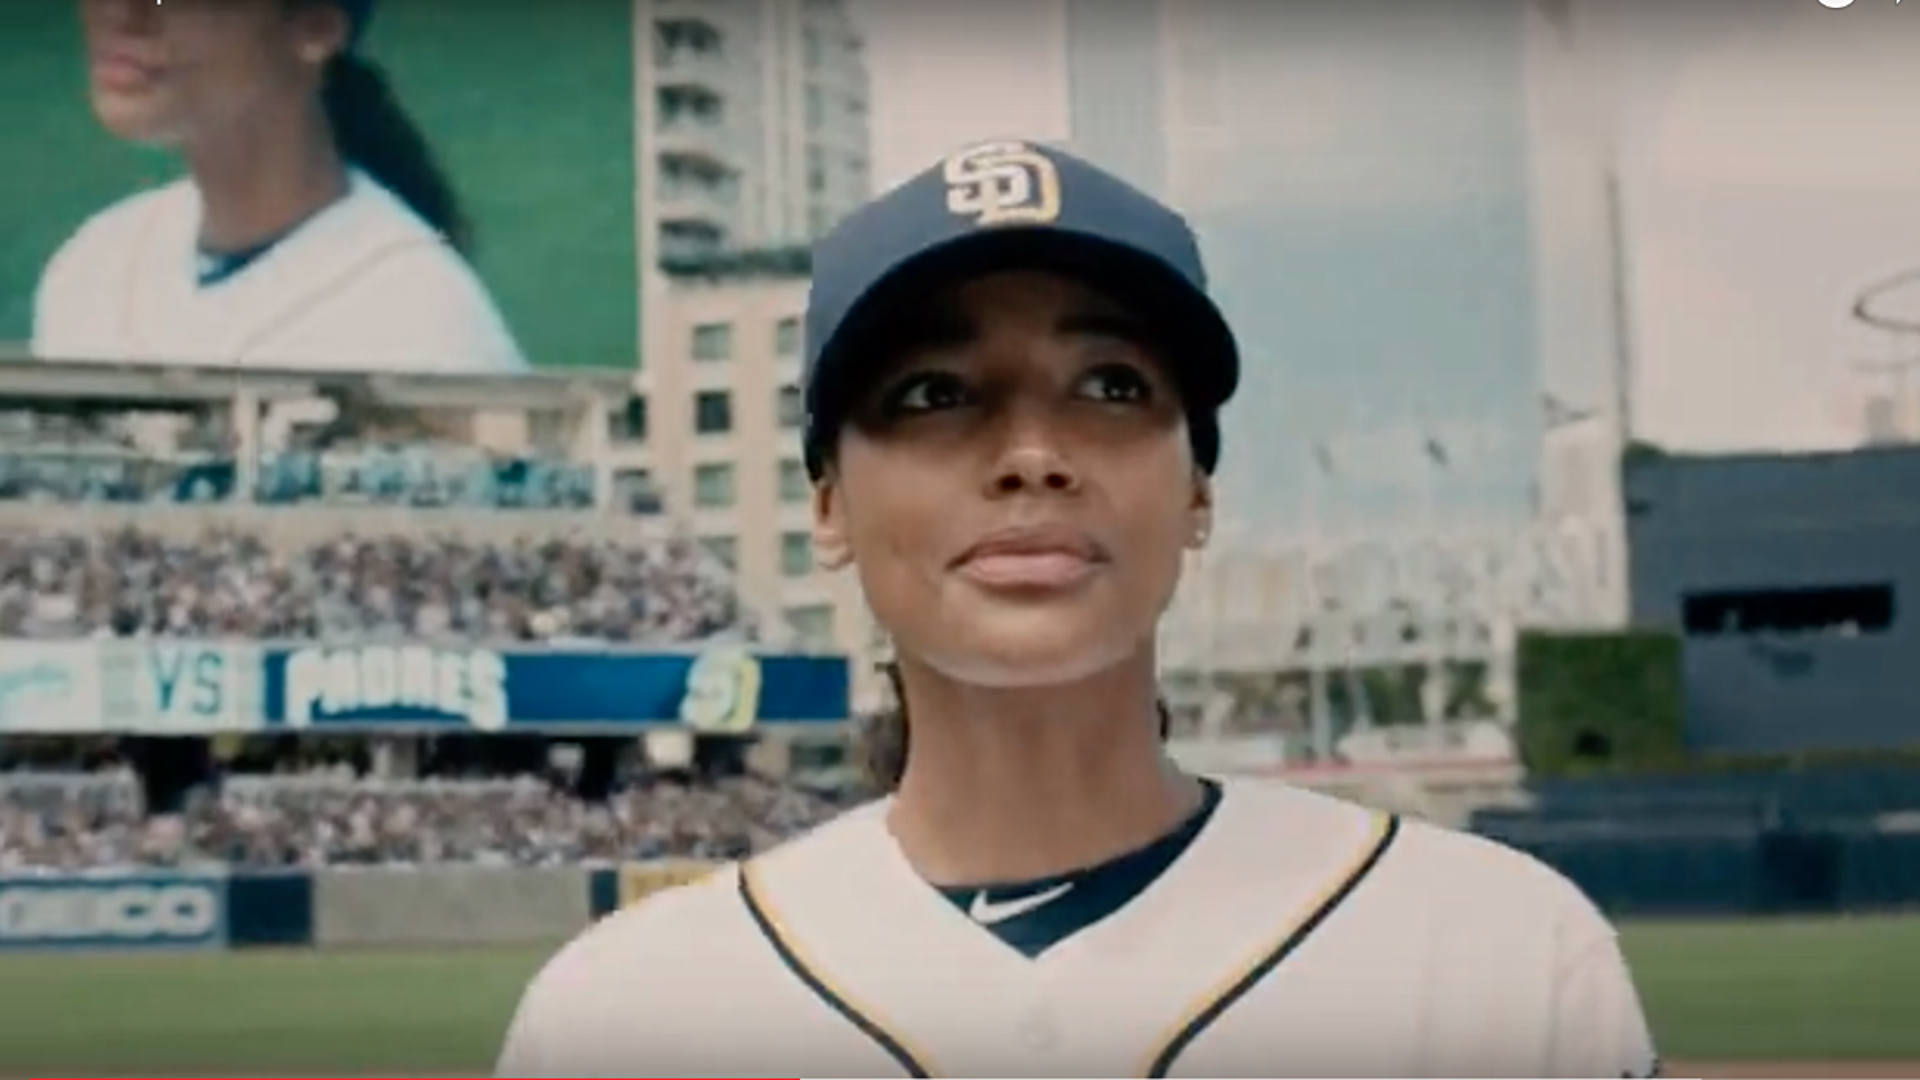 Will Fox’s ‘Pitch’ Hit It Out Of the Park?